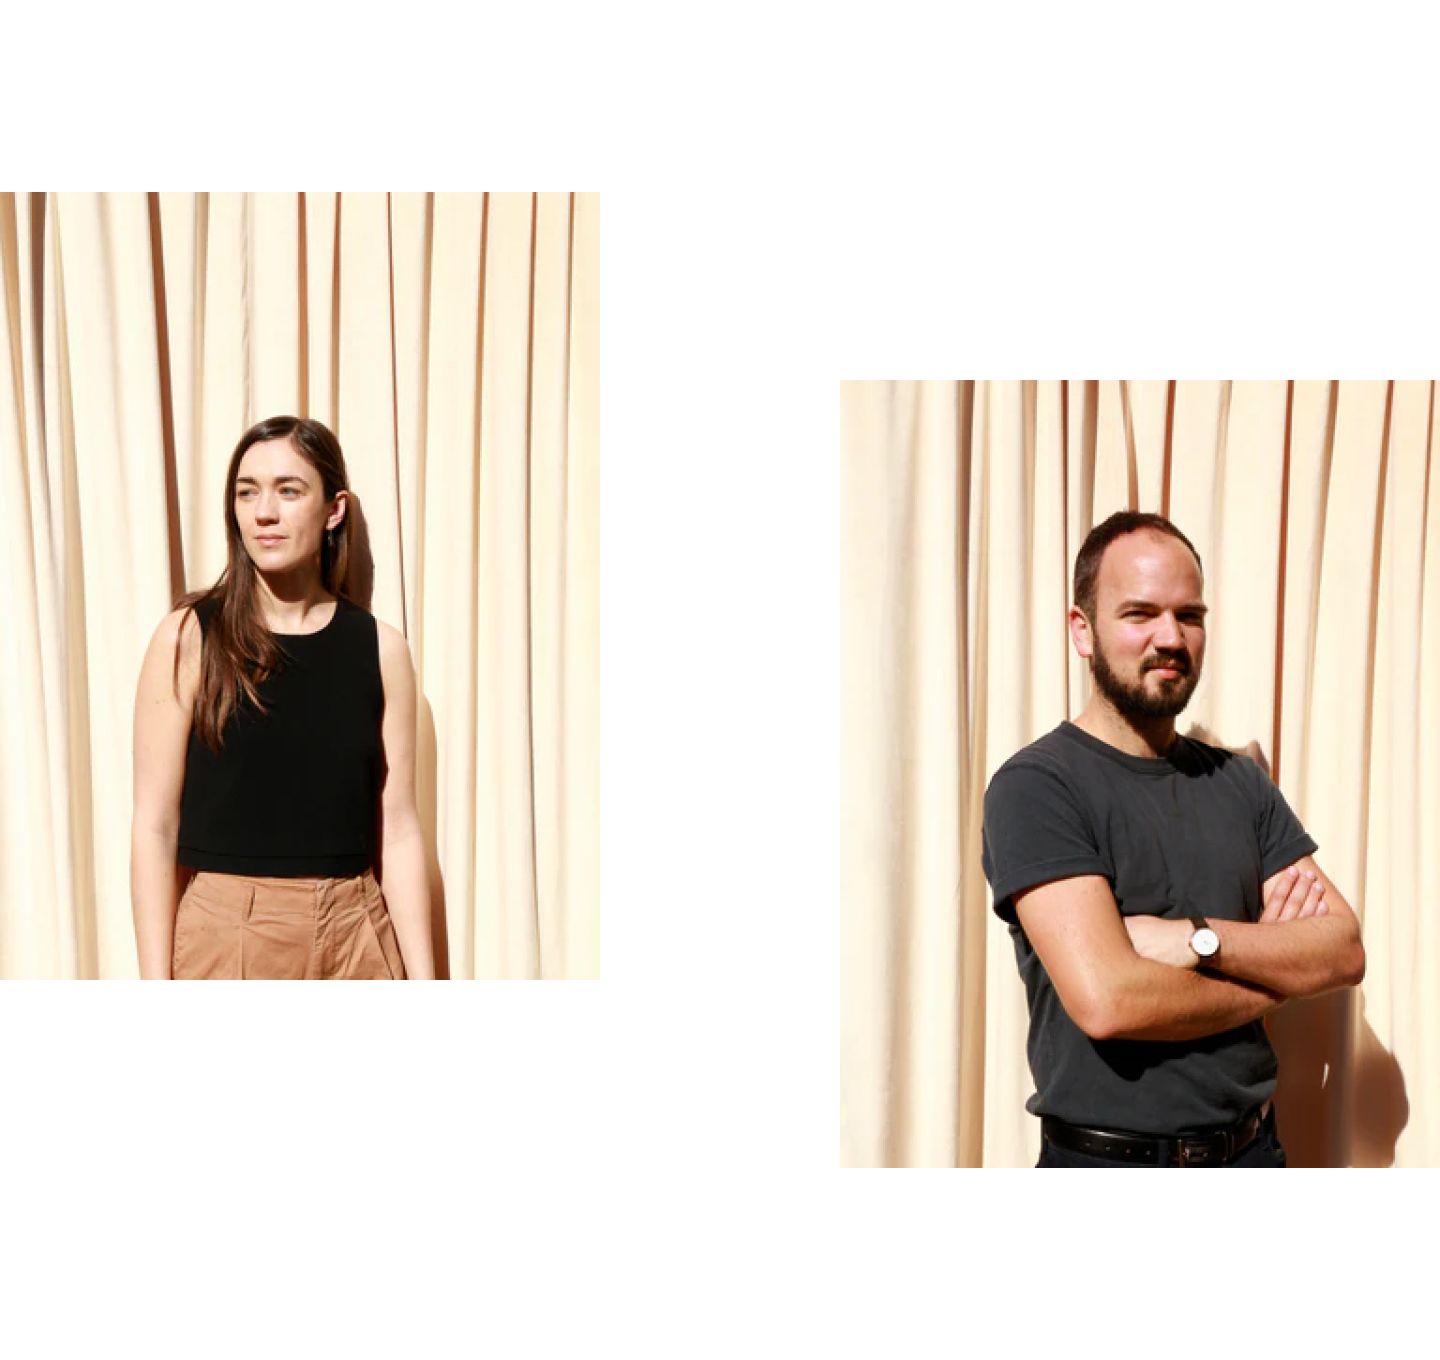 Photos of yield founders, Rachel and Andrew, on a white background.